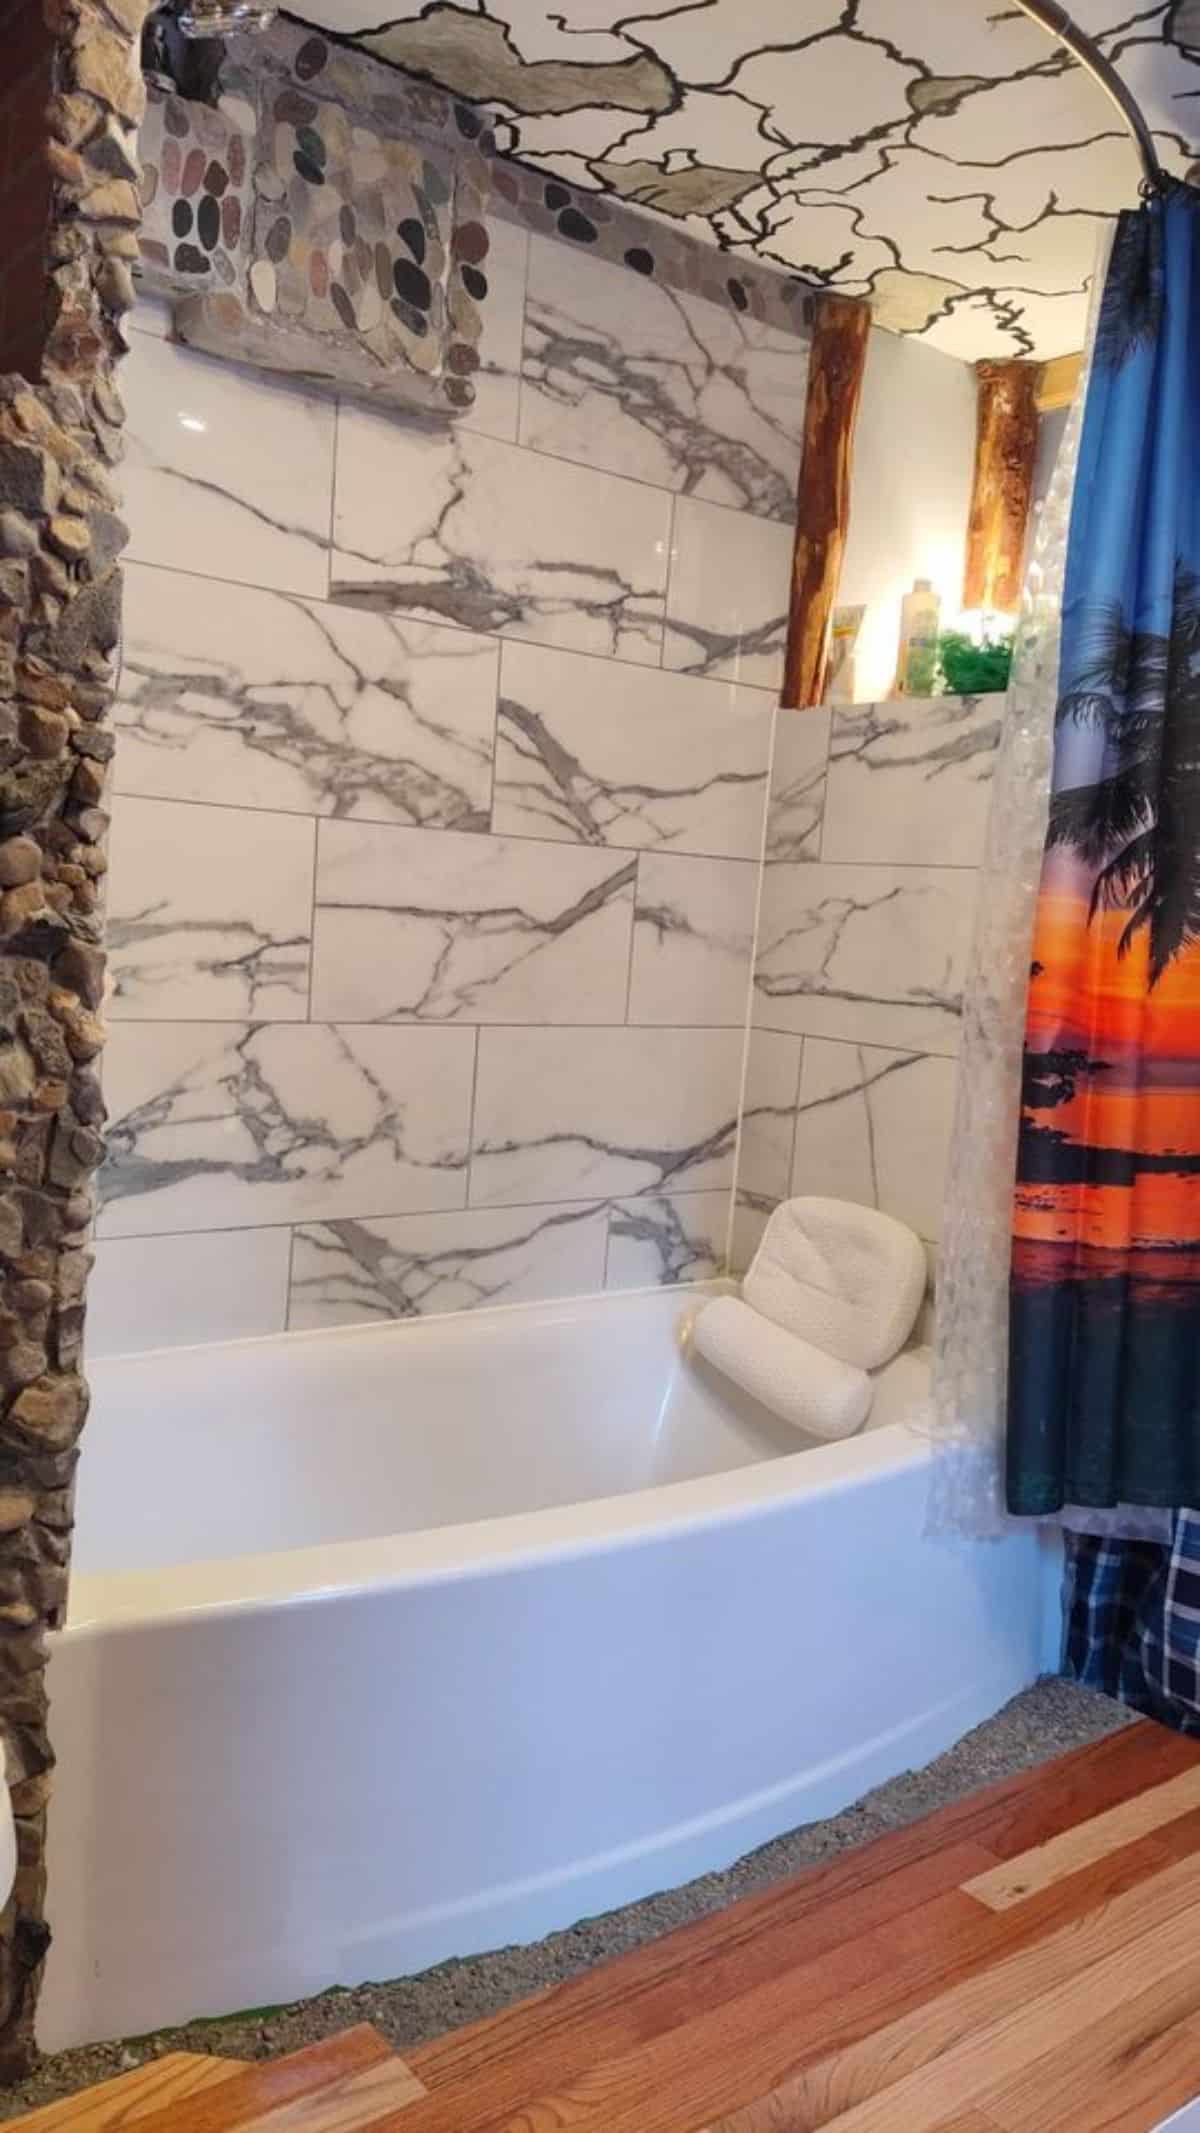 huge bathtub in bathroom of insulated container home